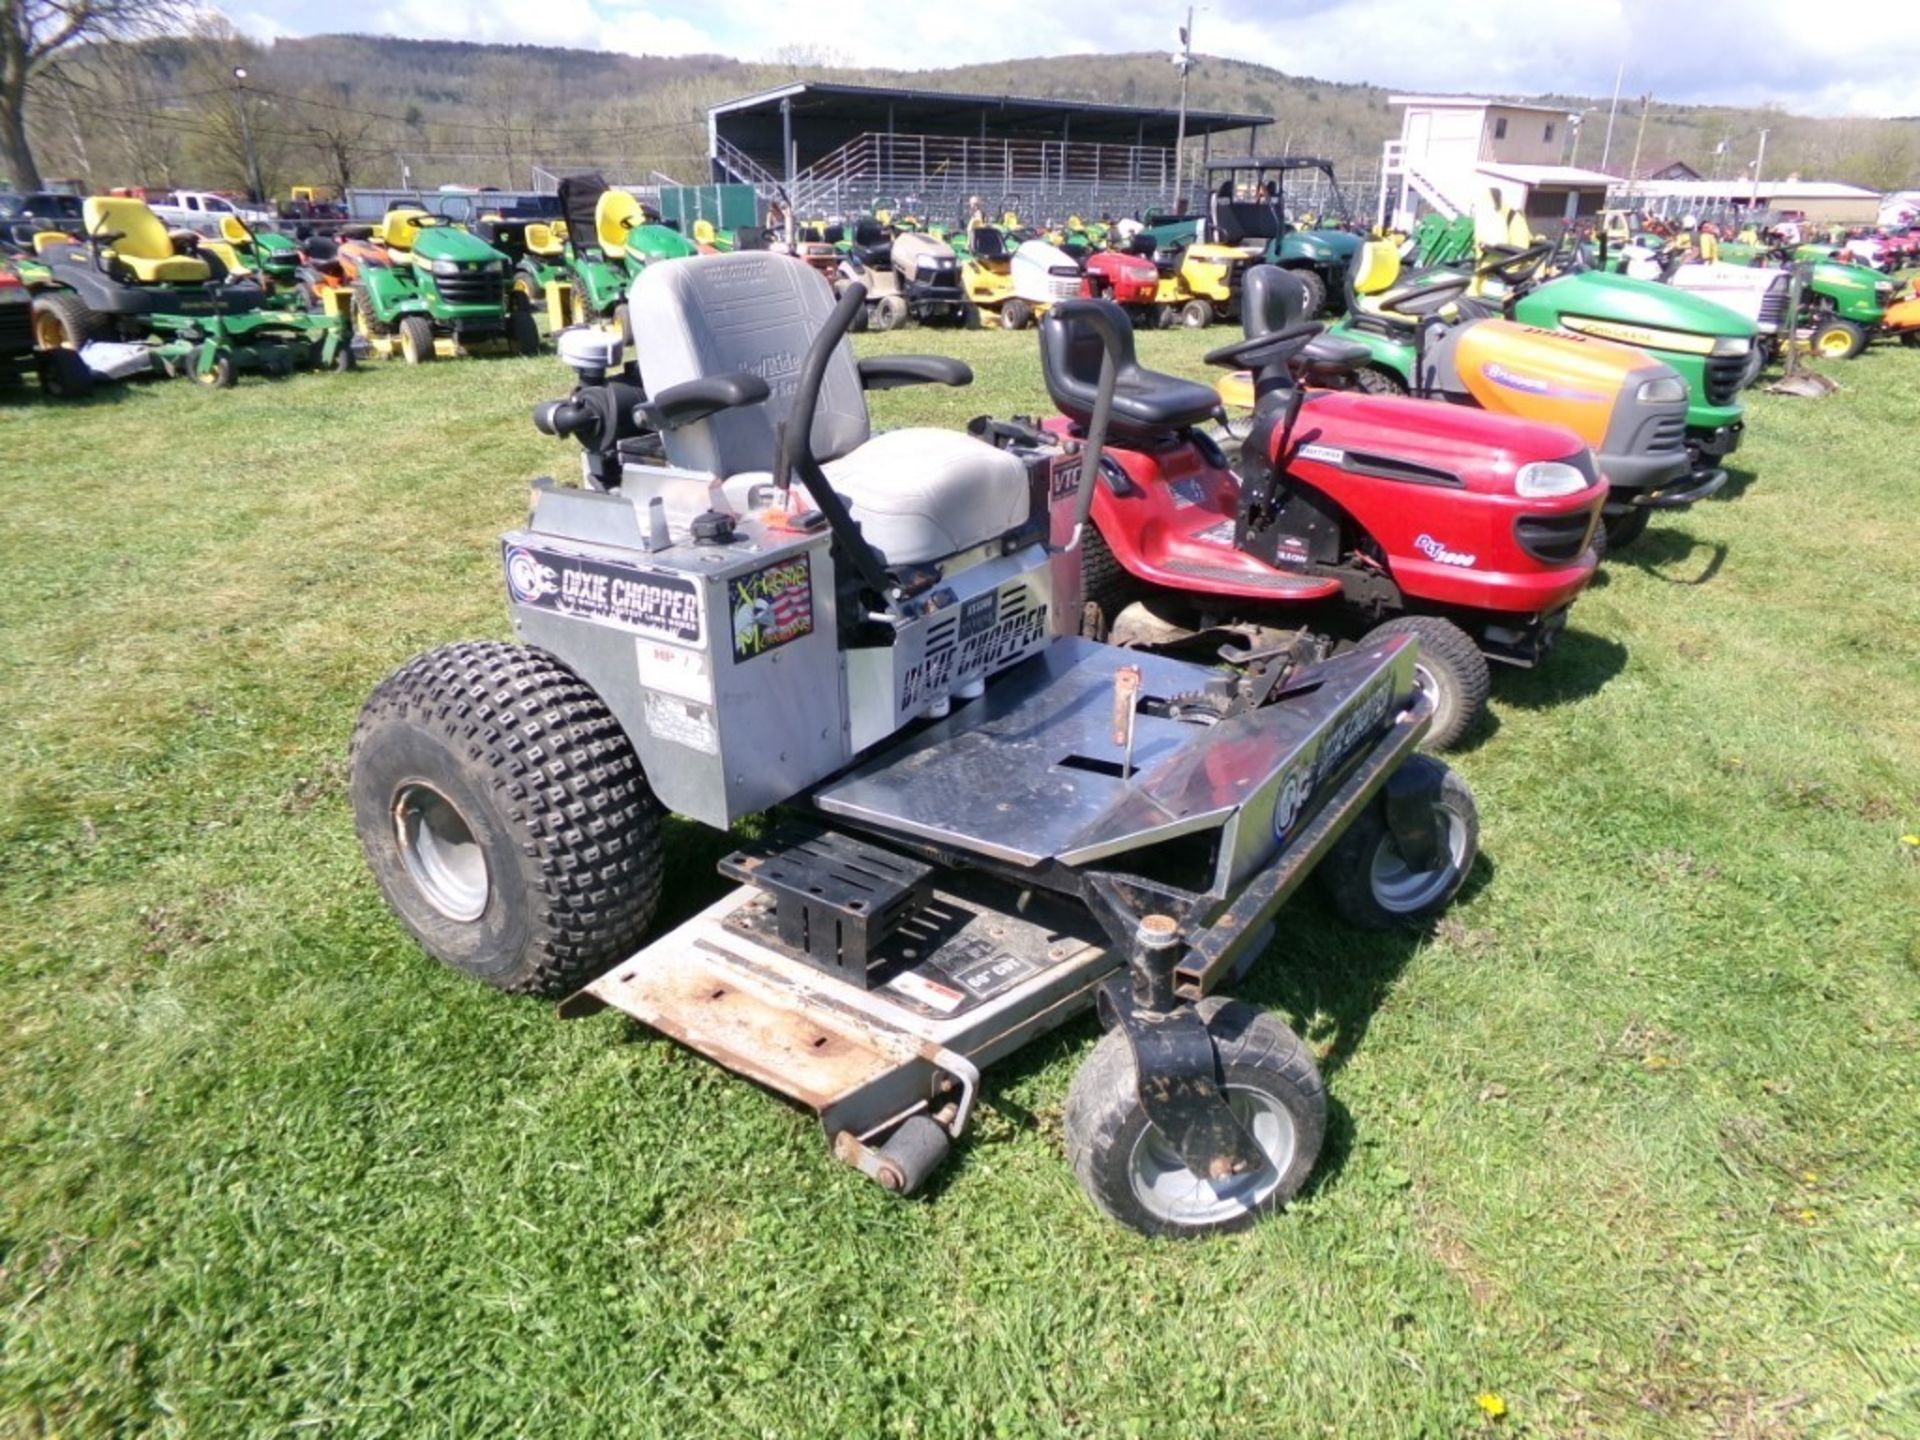 Dixie Chopper XT3300 Extreme, 60'' Deck, 33 HP Generac Engine, HOUR METER NOT WORKING (5927) - Image 2 of 2